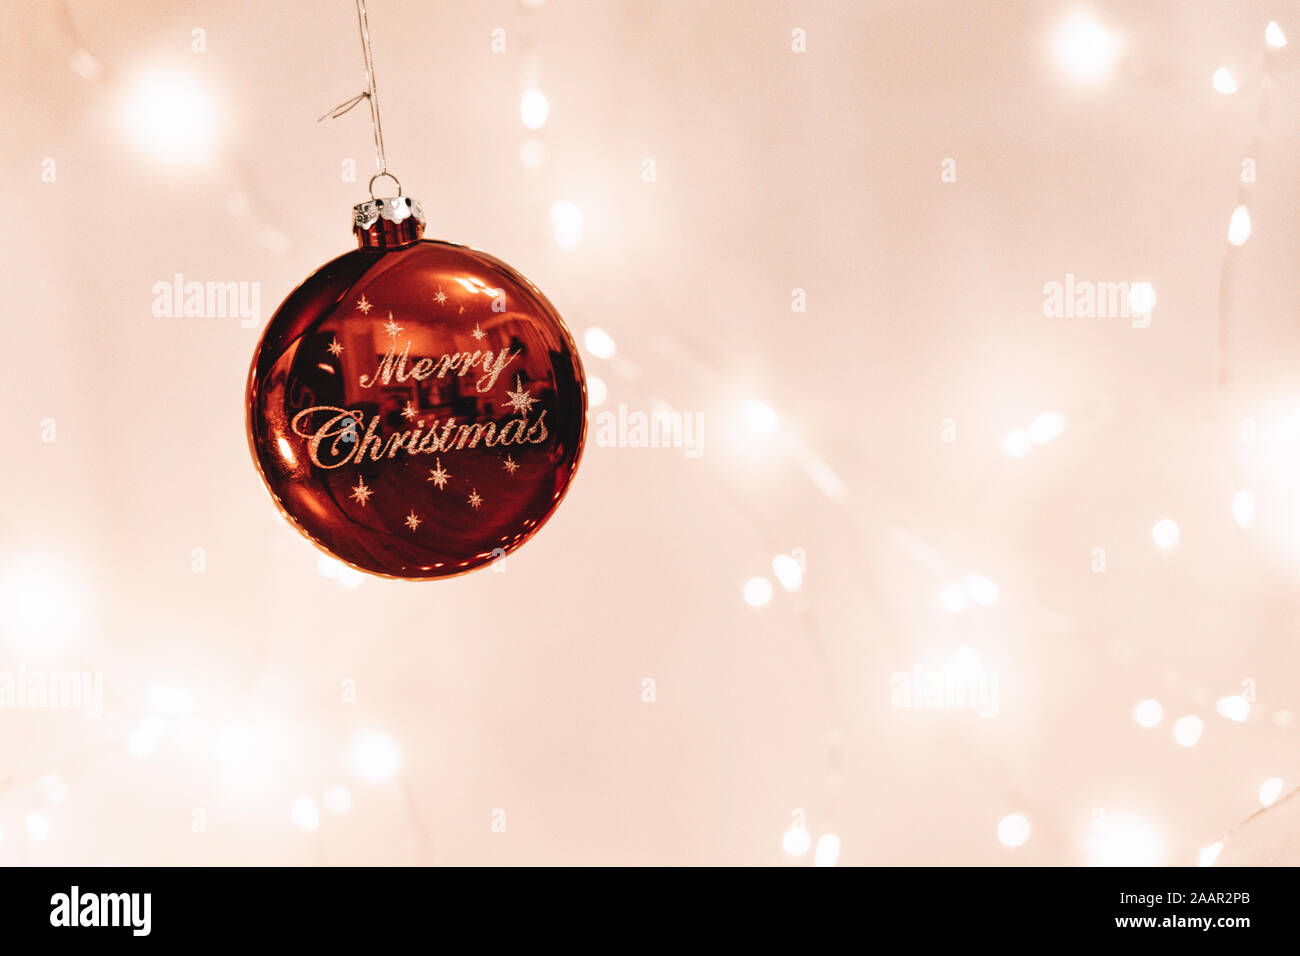 A 'Merry Christmas' Decoration with lights in the background Stock Photo